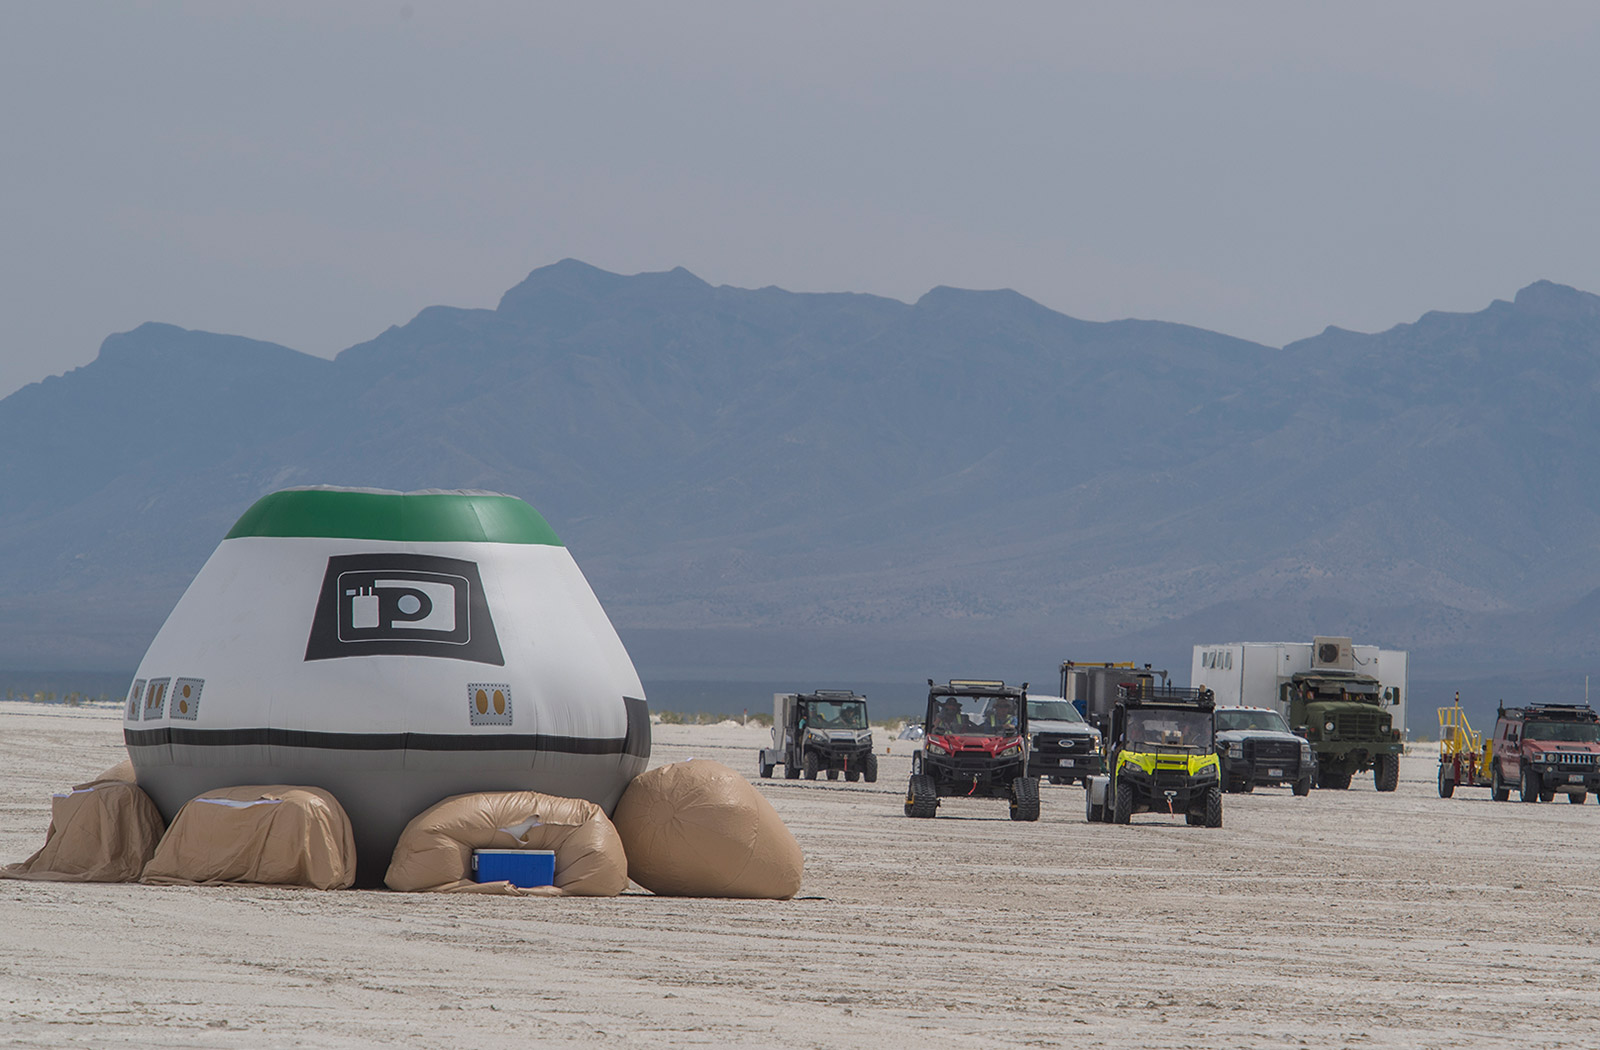 Rehearsal of safely bringing the Starliner spacecraft home to Earth at White Sands Missile Range